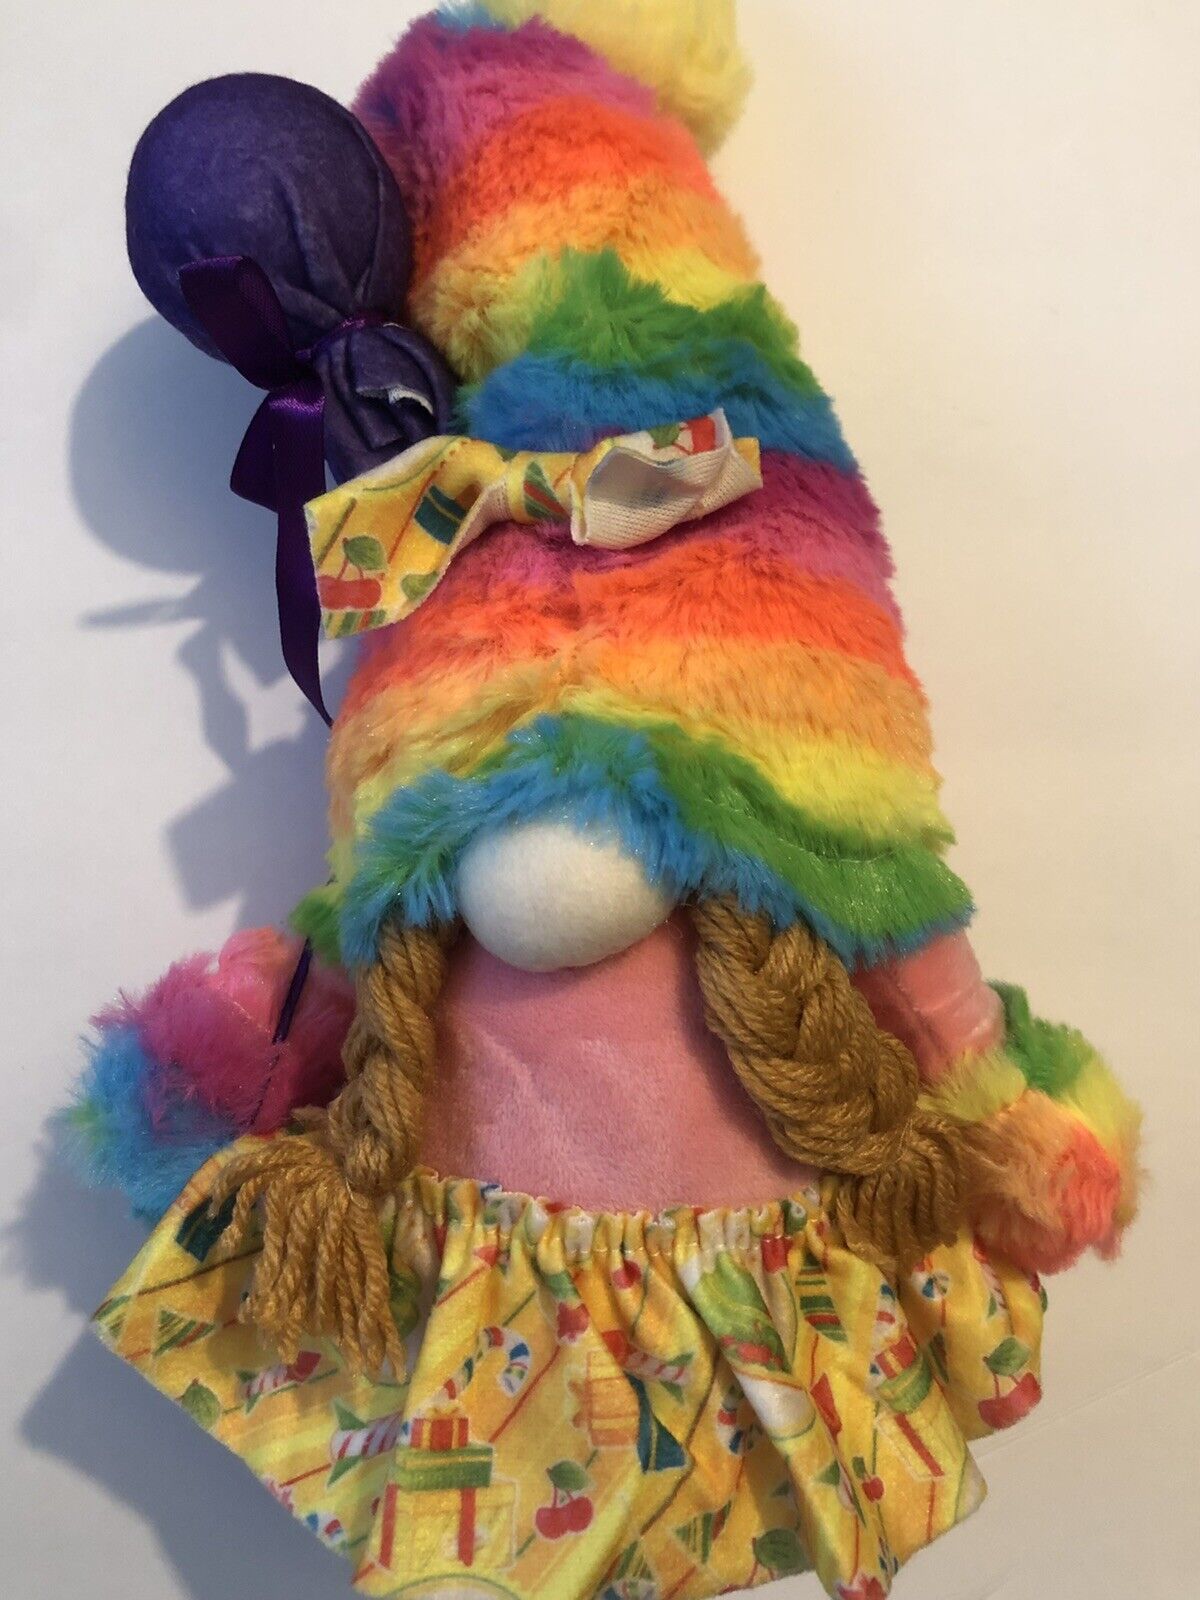 Rainbow Colored 12” Gnome Holding Balloon Shelf Display Collectible Plush